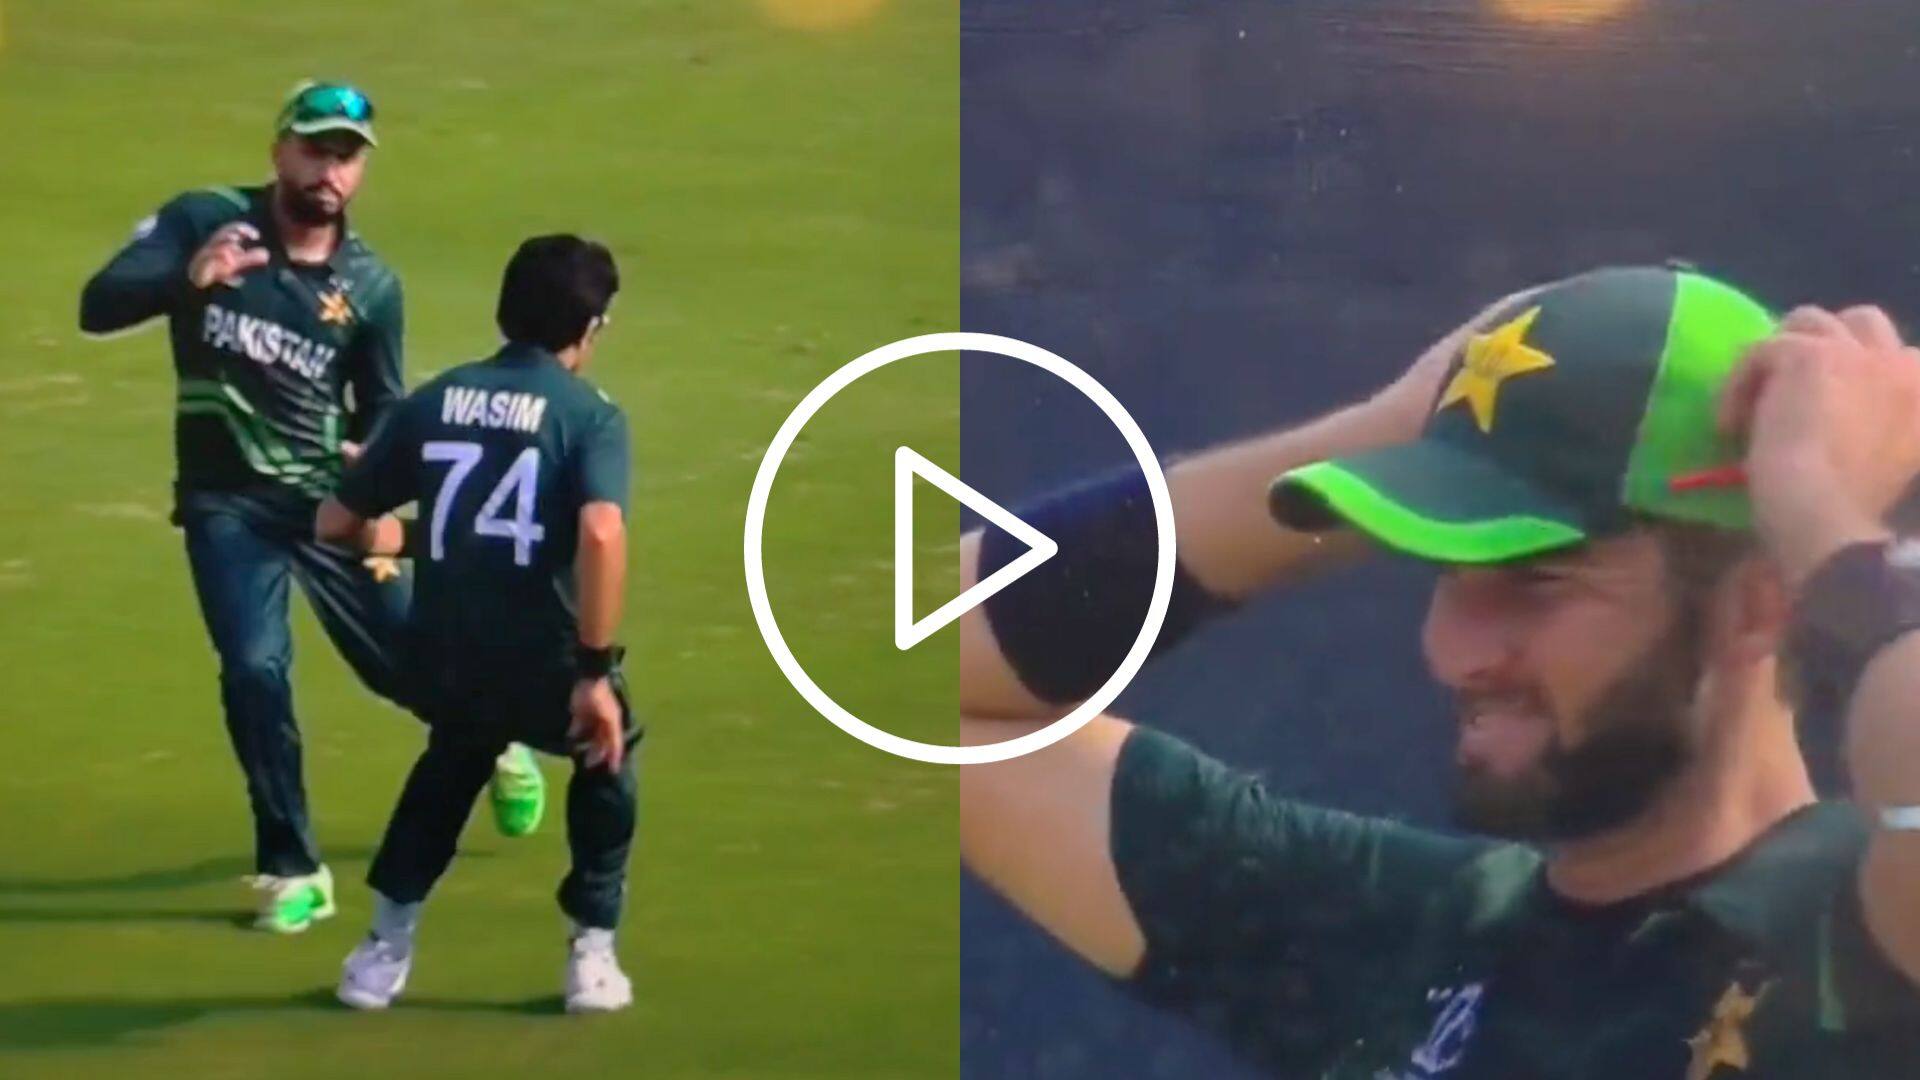 [Watch] Pakistan Produce Iconic Comical Fielding Again; Shaheen Afridi In Smiles